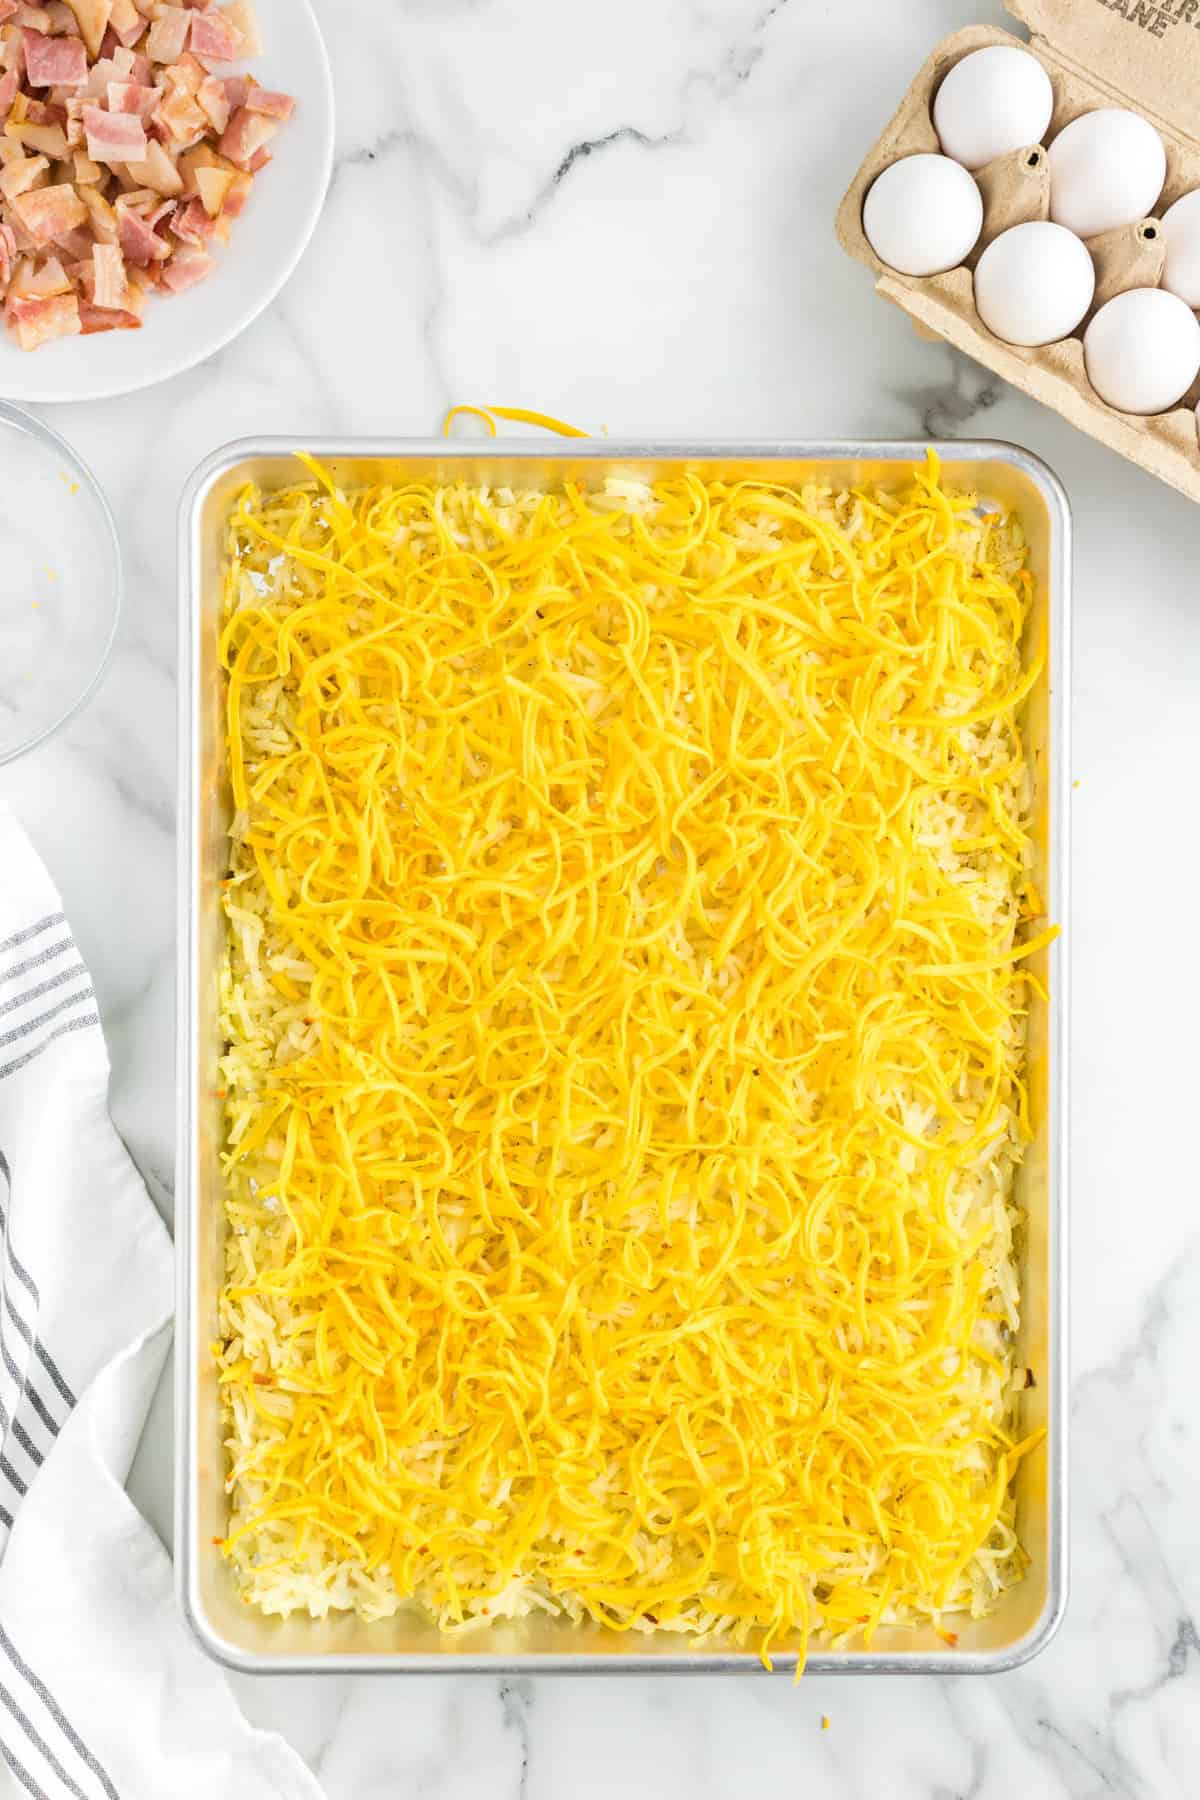 Topping Mixture with Shredded Cheese for Sheet Pan Breakfast Recipe